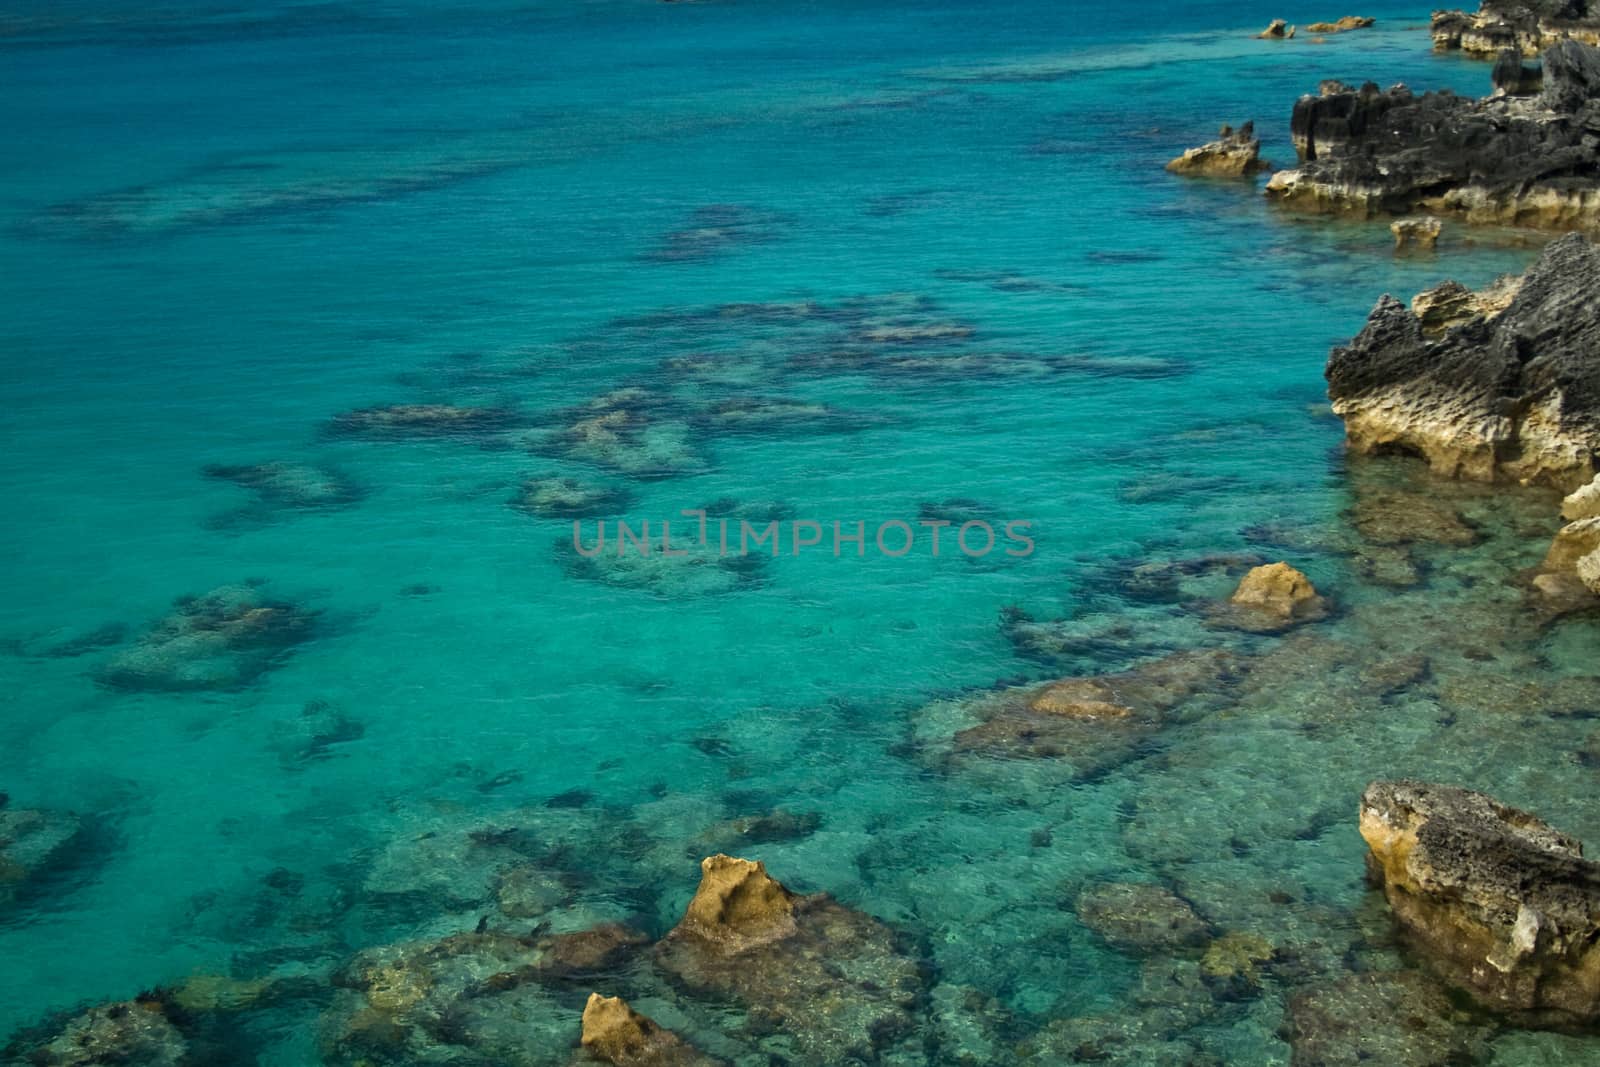 Clear, tropical sea, with underwater reef clearly visible, along with coastal rocks